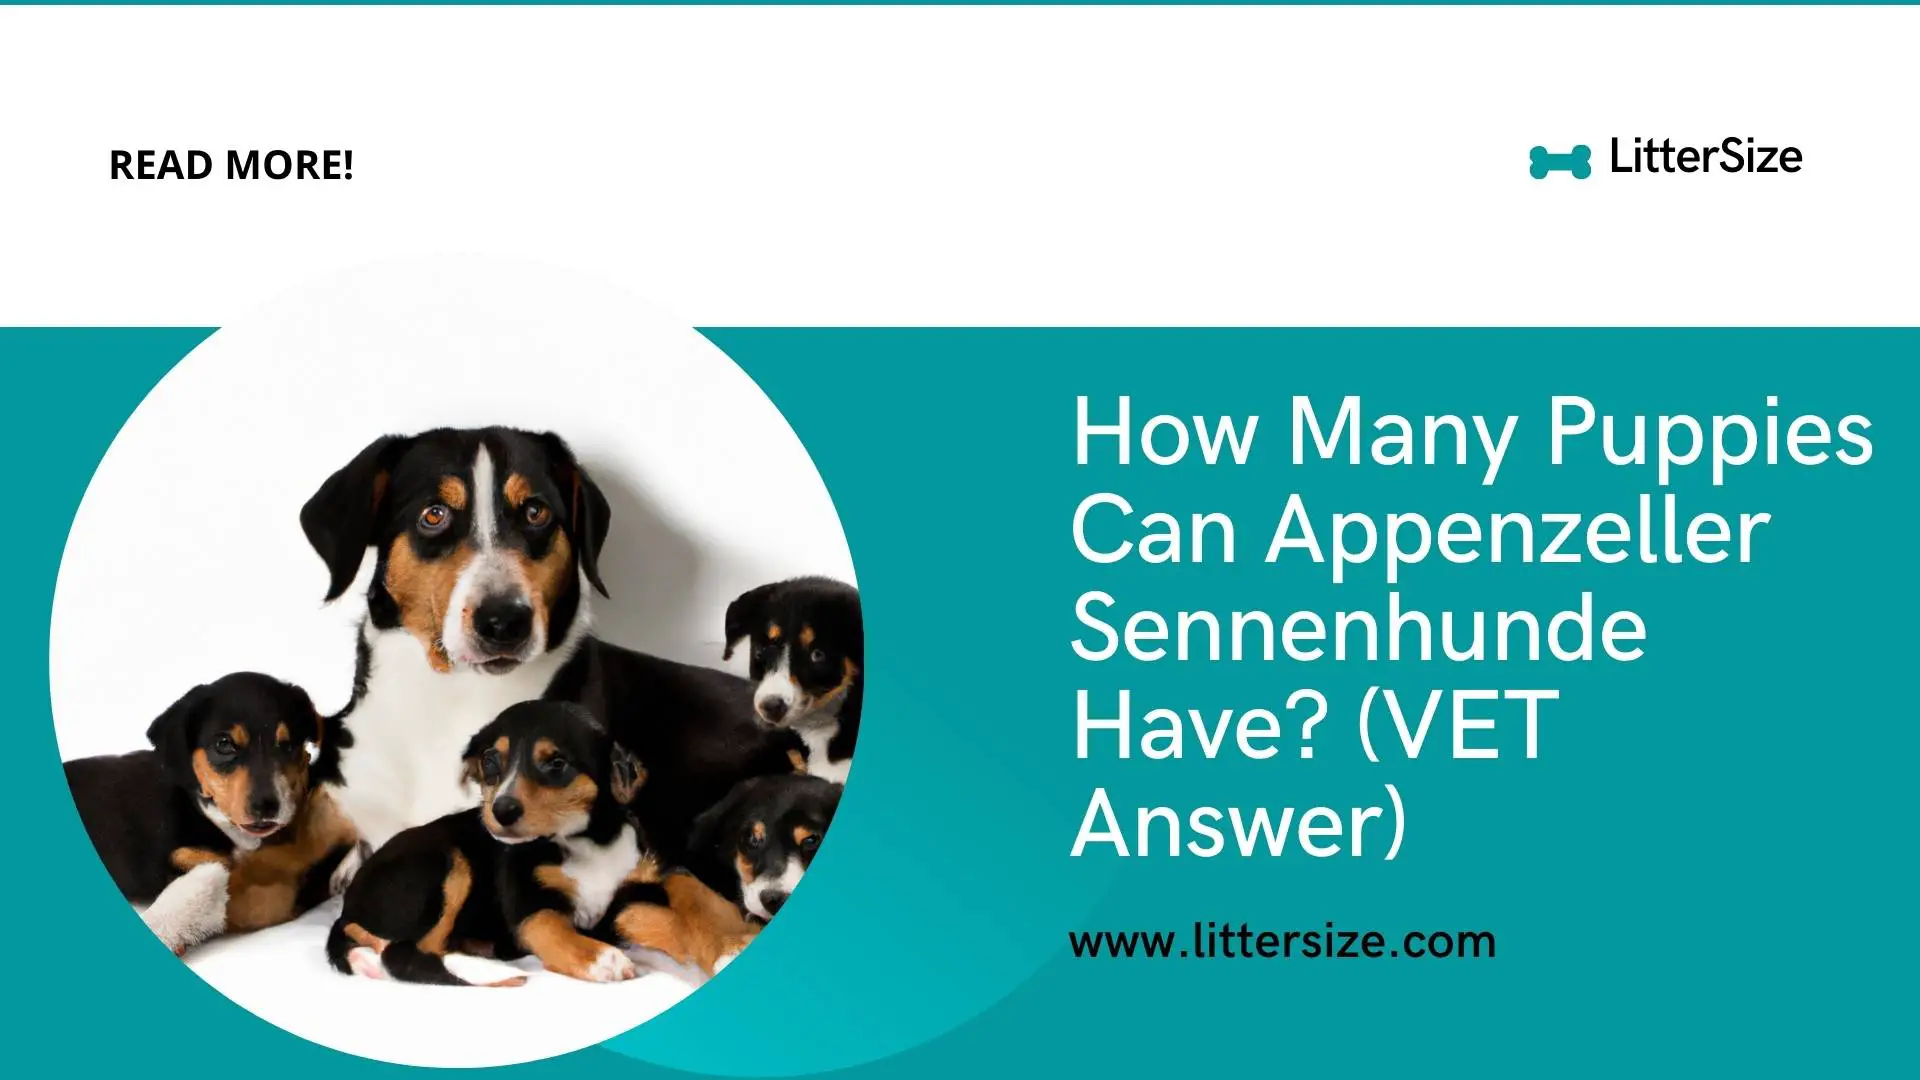 How Many Puppies Can Appenzeller Sennenhunde Have? (VET Answer)